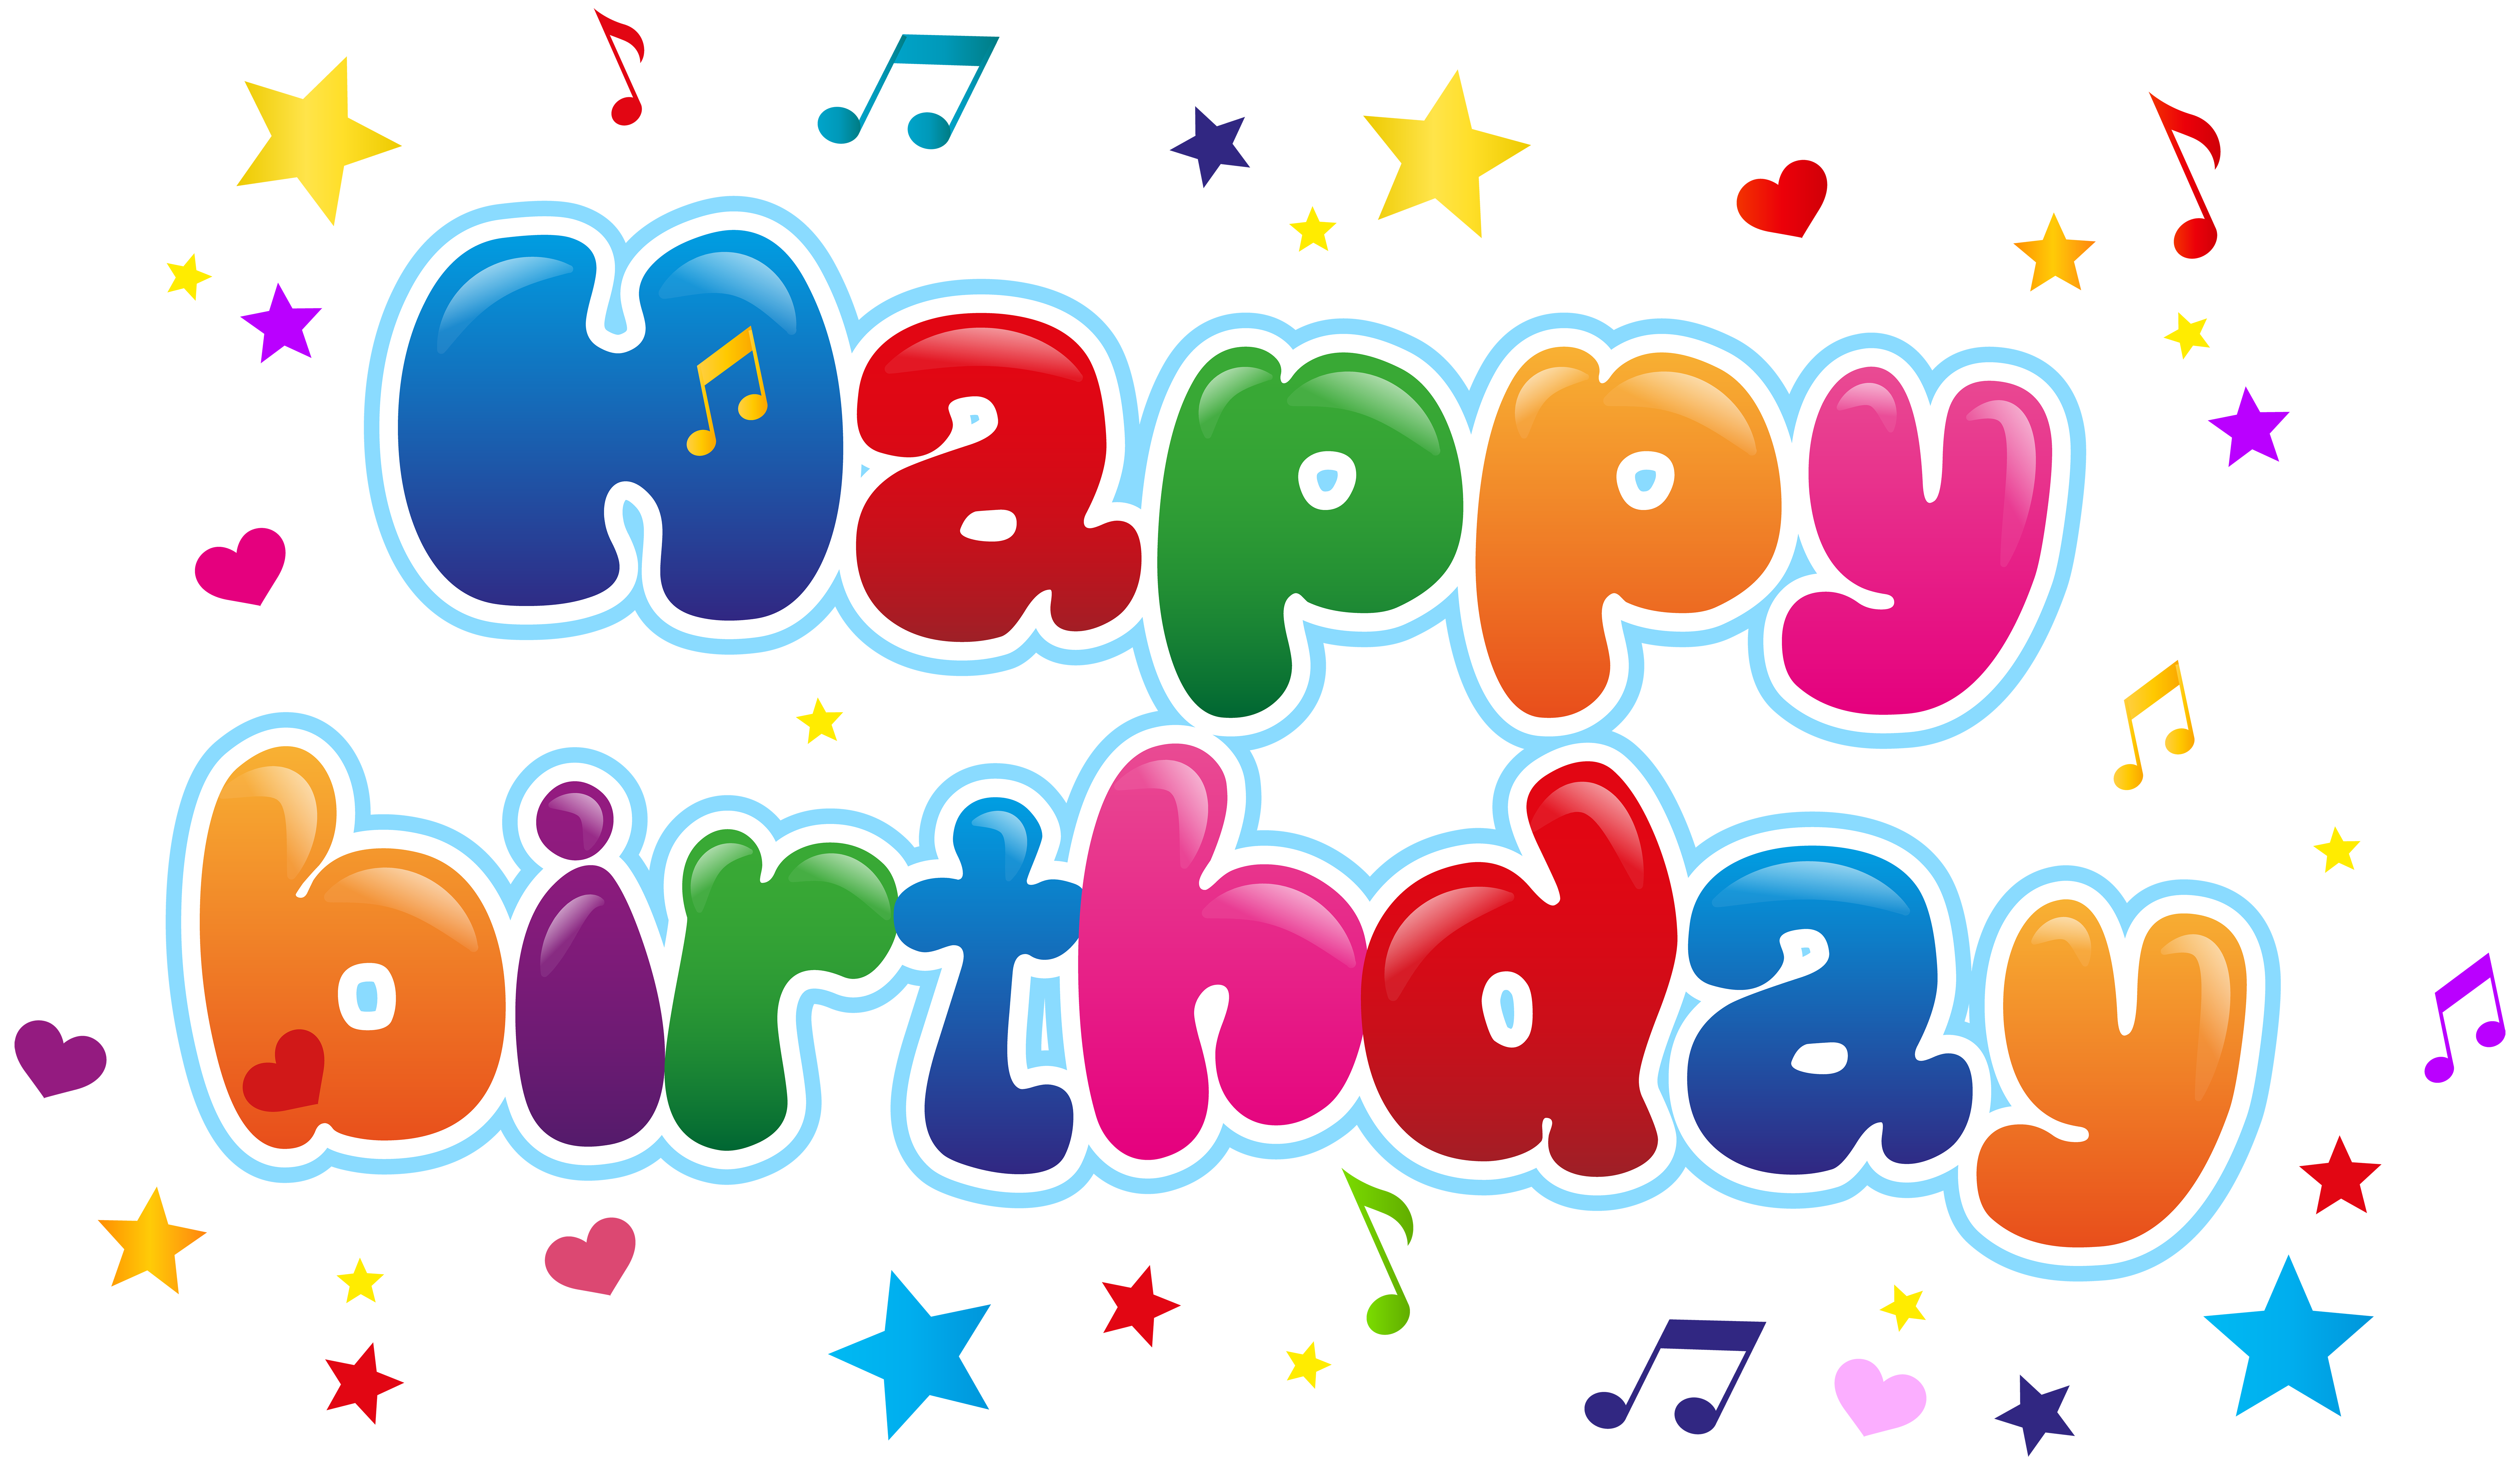 Birthday Hat Png Hd PNG Image